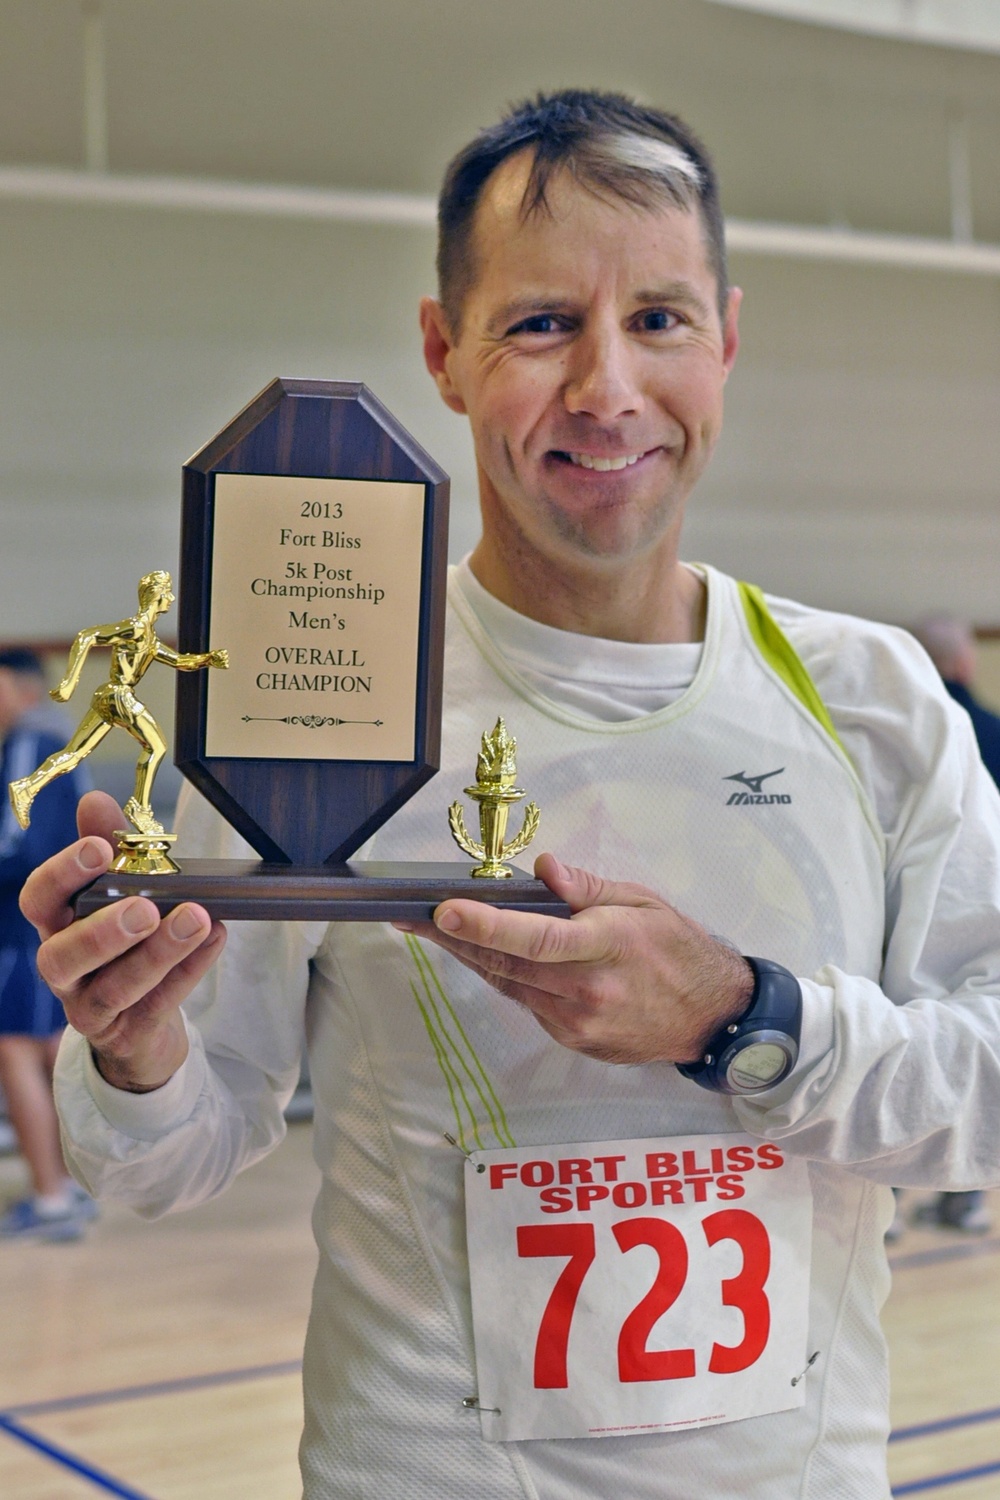 600 race to finish Fort Bliss 5K Commander's Cup